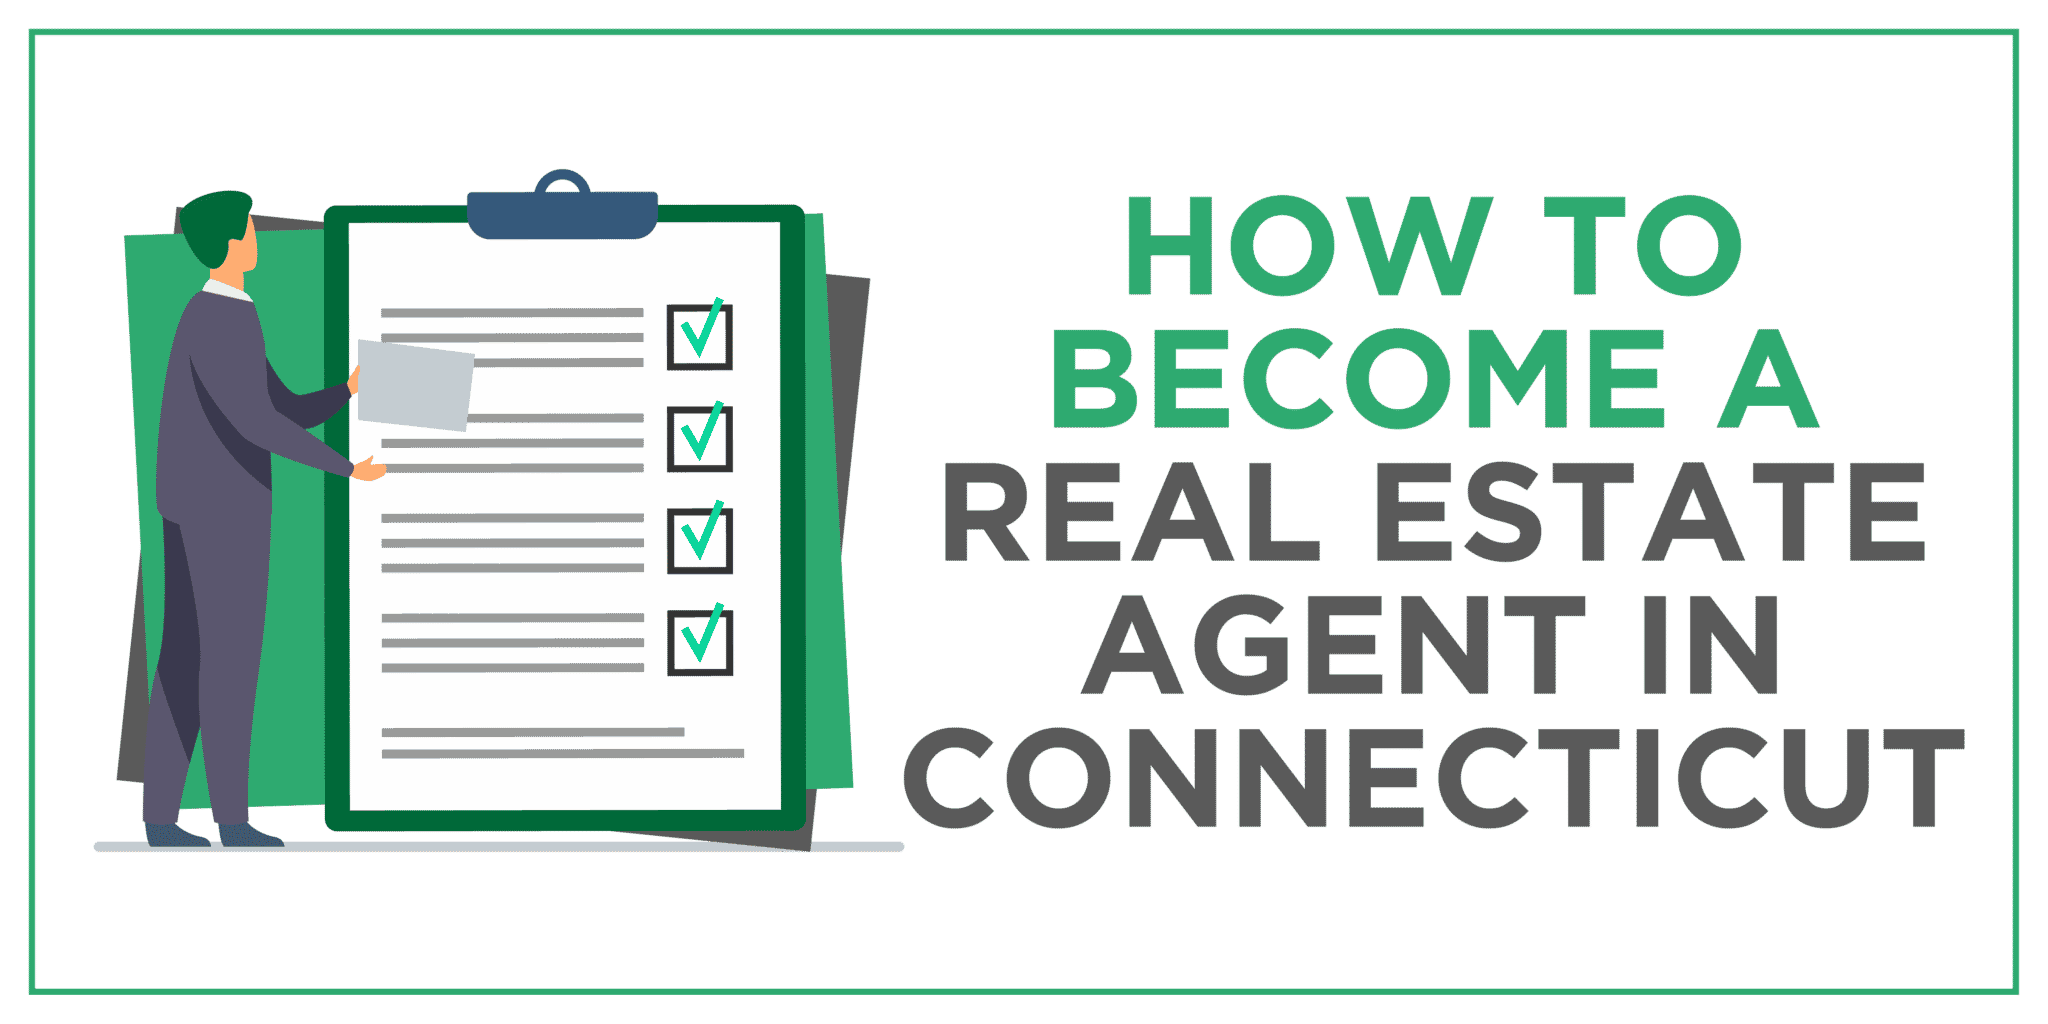 Become a Real Estate Agent in Connecticut